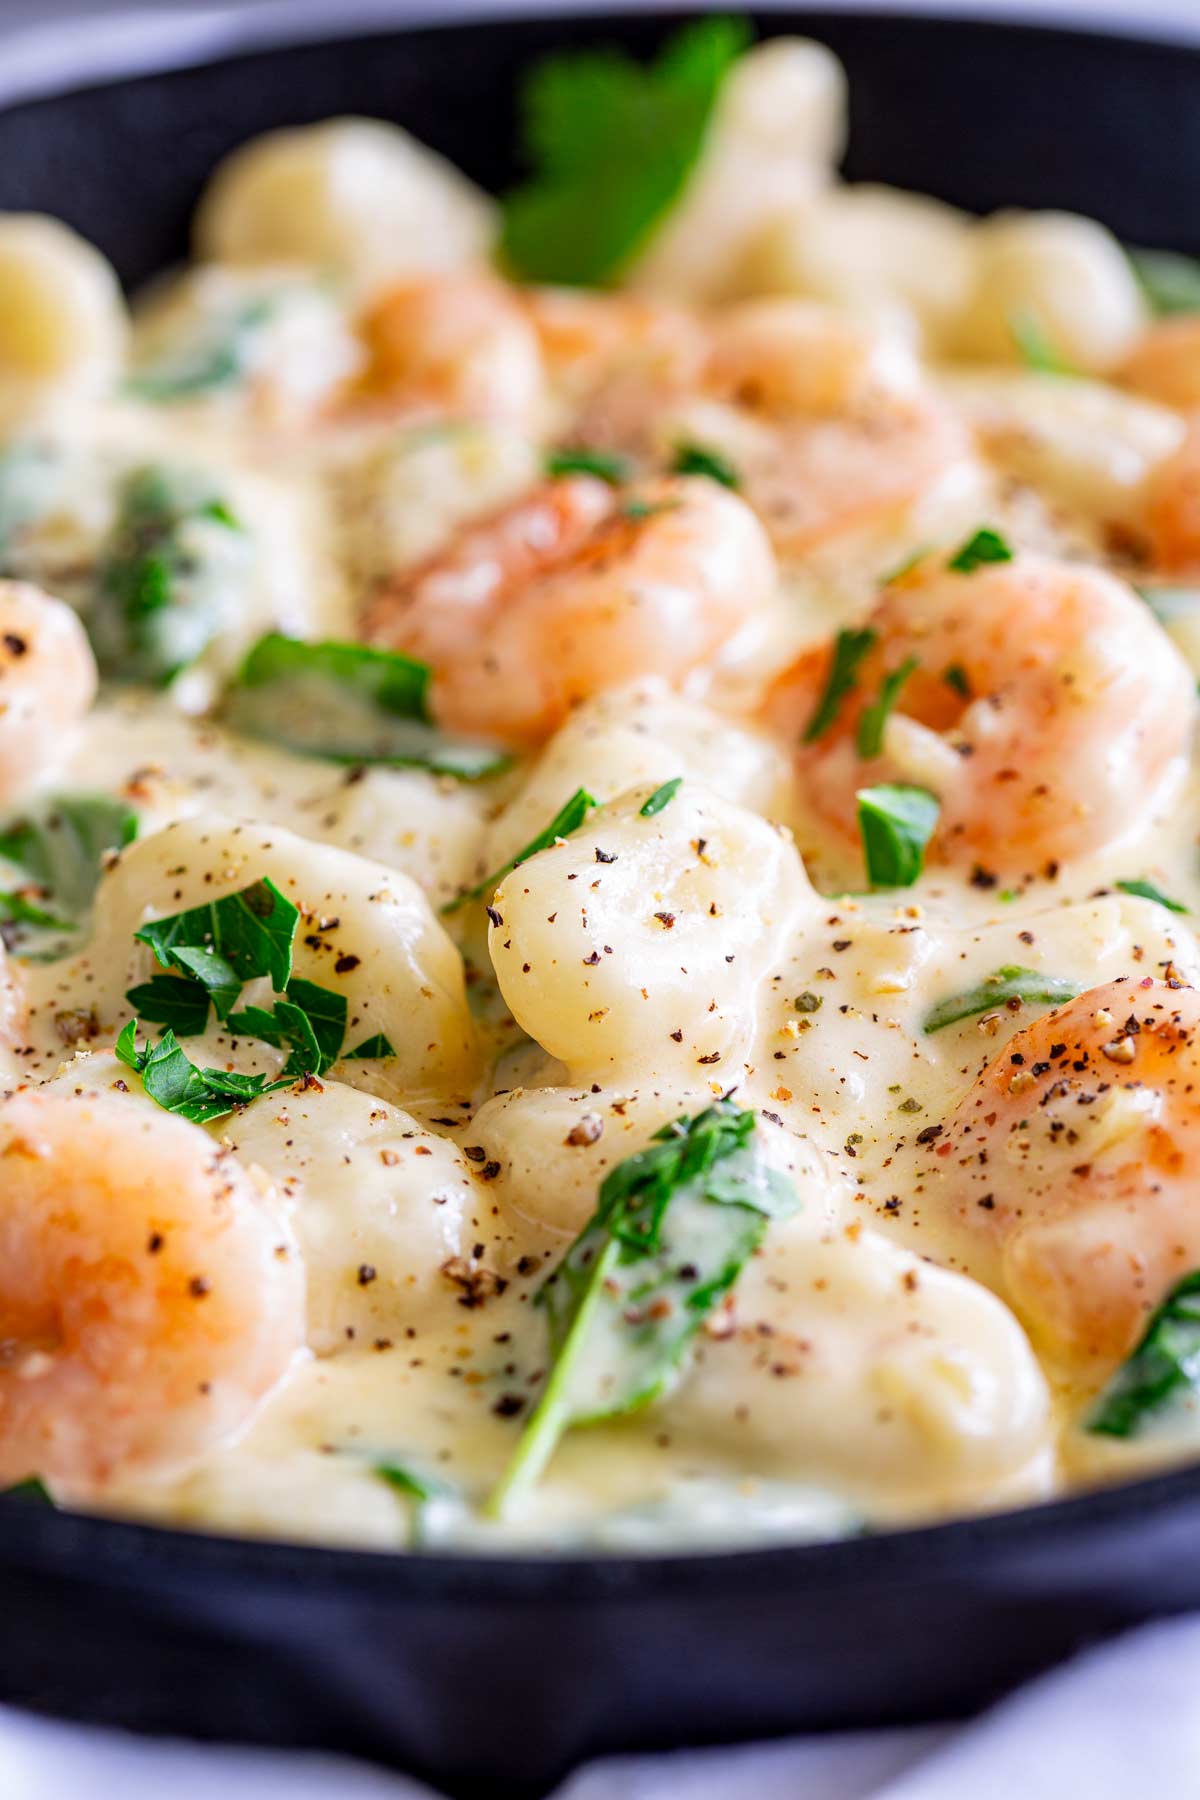 gnocchi and shrimp in a white sauce garnished with parsley